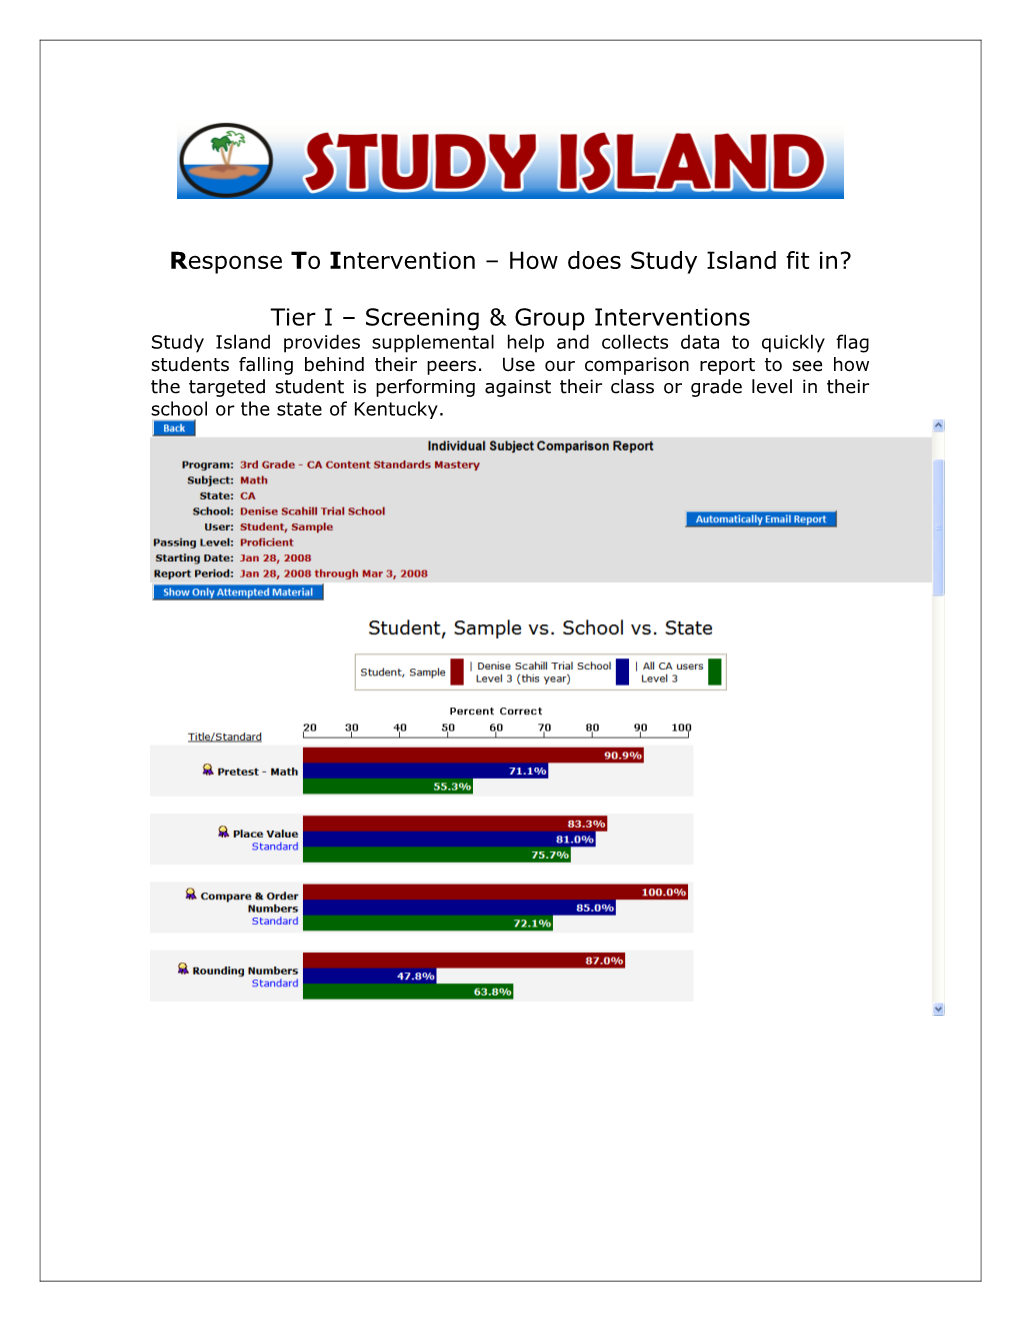 Response to Intervention How Does Study Island Fit In?